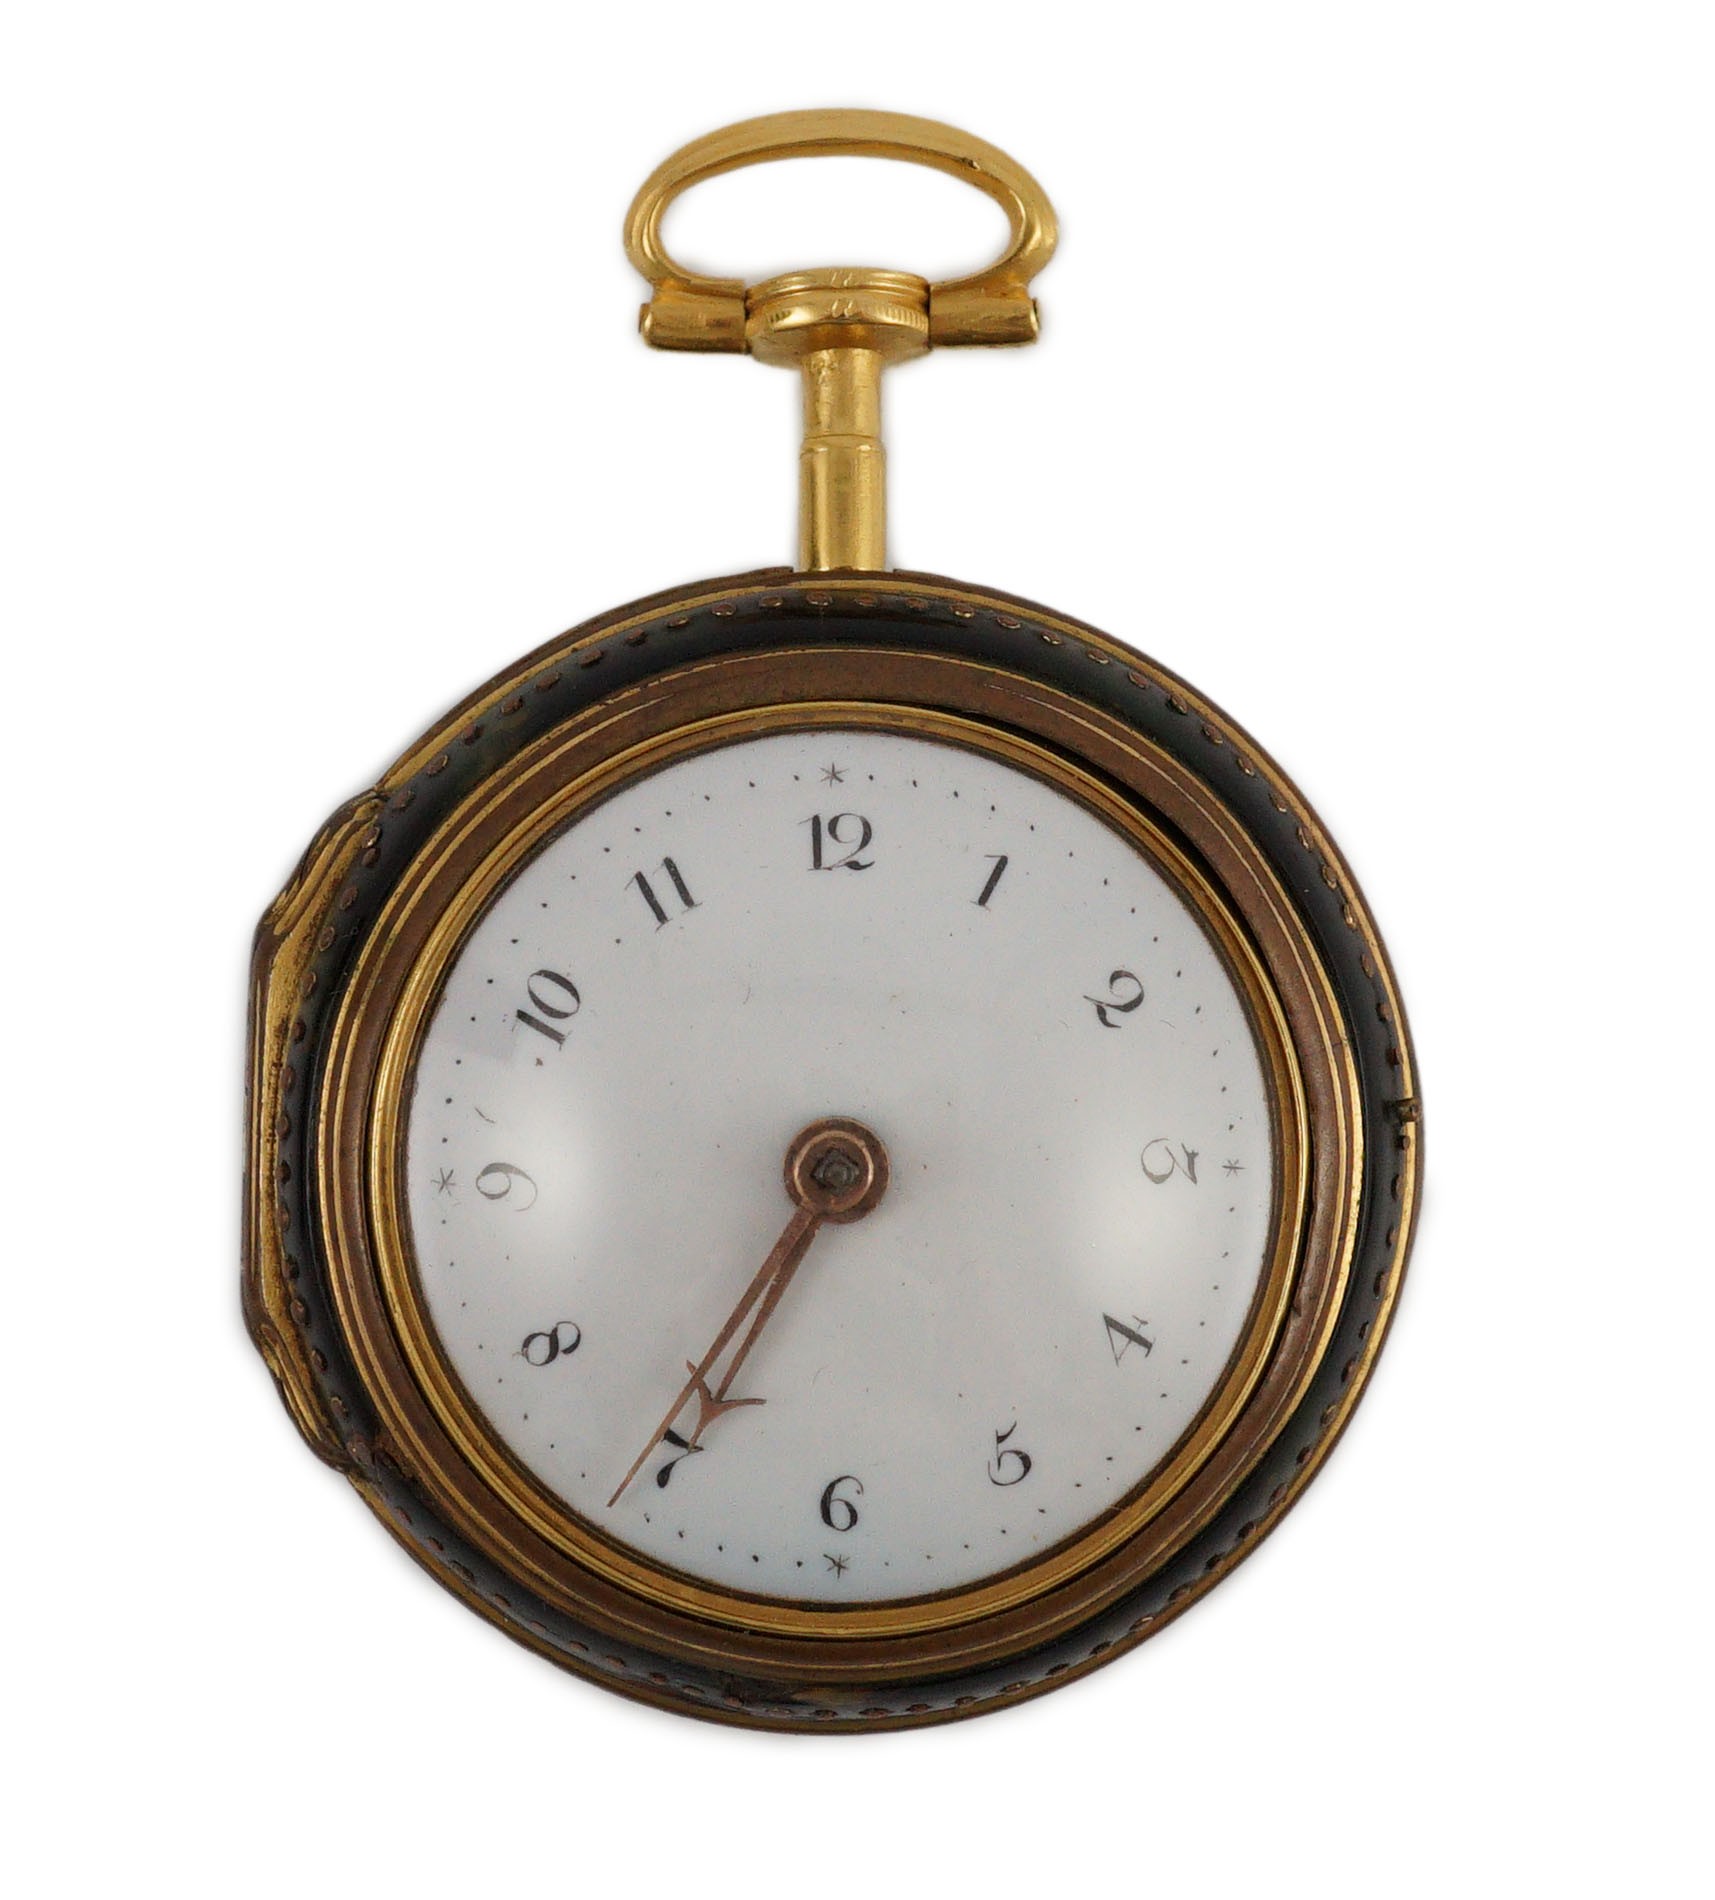 A mid 18th century gilt metal and tortoiseshell pair cased keywind verge pocket watch by Catlin,